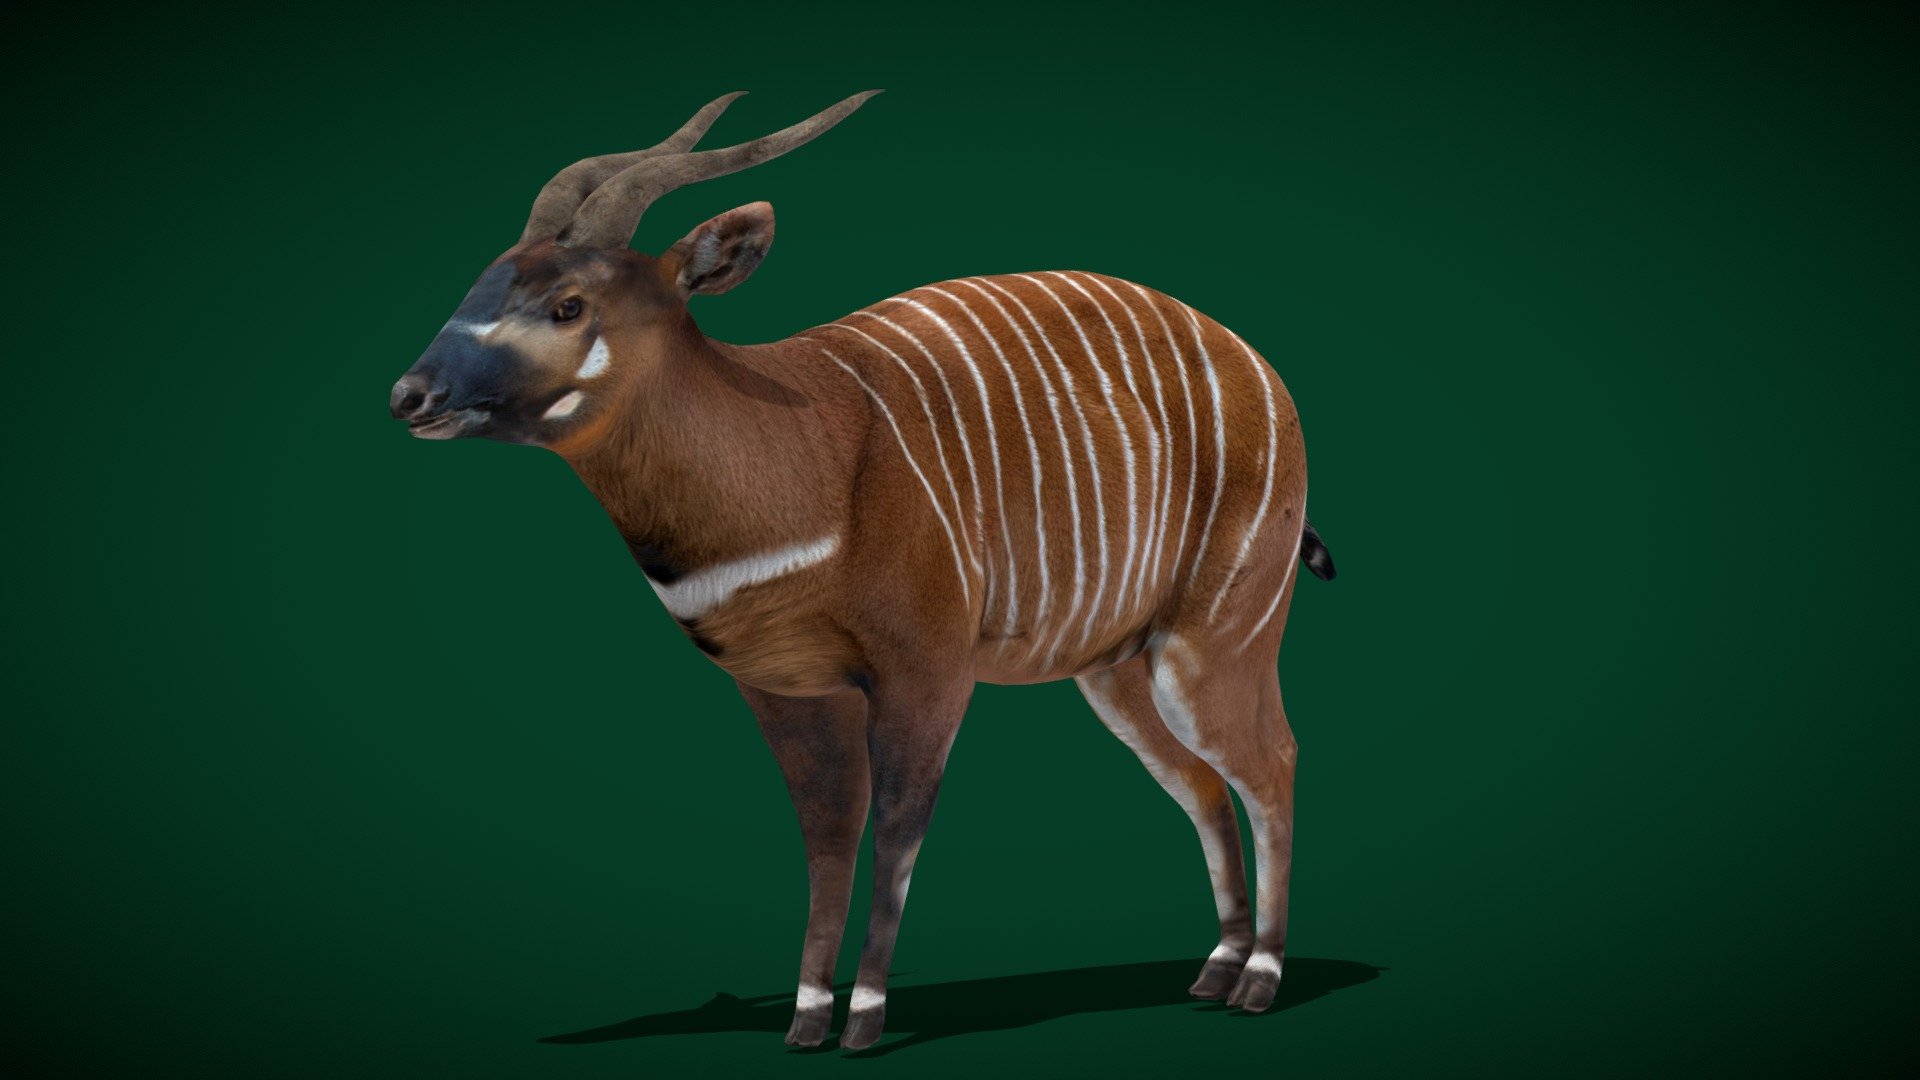 **Anyimals Blender Add on Assets Same Rigs Feather **




Eastern Bongo Antelope  (forest-dwelling antelope) Endangered, sub-Saharan Africa

Tragelaphus eurycerus Animal Mammal (  tragelaphid) Bovidae

1 Draw Calls

Lowpoly

Game Ready Asset

Subdivision Surface Ready

6 Animations

4K PBR Textures Materials

Unreal FBX (Unreal 4,5 Plus)

Unity FBX

Blend File 3.6.5 LTS

USDZ File (AR Ready). Real Scale Dimension (Xcode ,Reality Composer, Keynote Ready)

Textures Files

GLB File (Unreal 5.1 Plus Native Support)

Gltf File ( Spark AR, Lens Studio(SnapChat) , Effector(Tiktok) , Spline, Play Canvas,Omiverse ) Compatible

Triangles -11790

Faces     -6044

Edges     -12014

Vertices  -5975

Diffuse, Metallic, Roughness , Normal Map ,Specular Map,AO

The bongo is a large, mostly nocturnal, forest-dwelling antelope, native to sub-Saharan Africa. Bongos are characterised by a striking reddish-brown coat, black - Eastern Bongo Male Antelope  (Endangered) - Buy Royalty Free 3D model by Nyilonelycompany 3d model